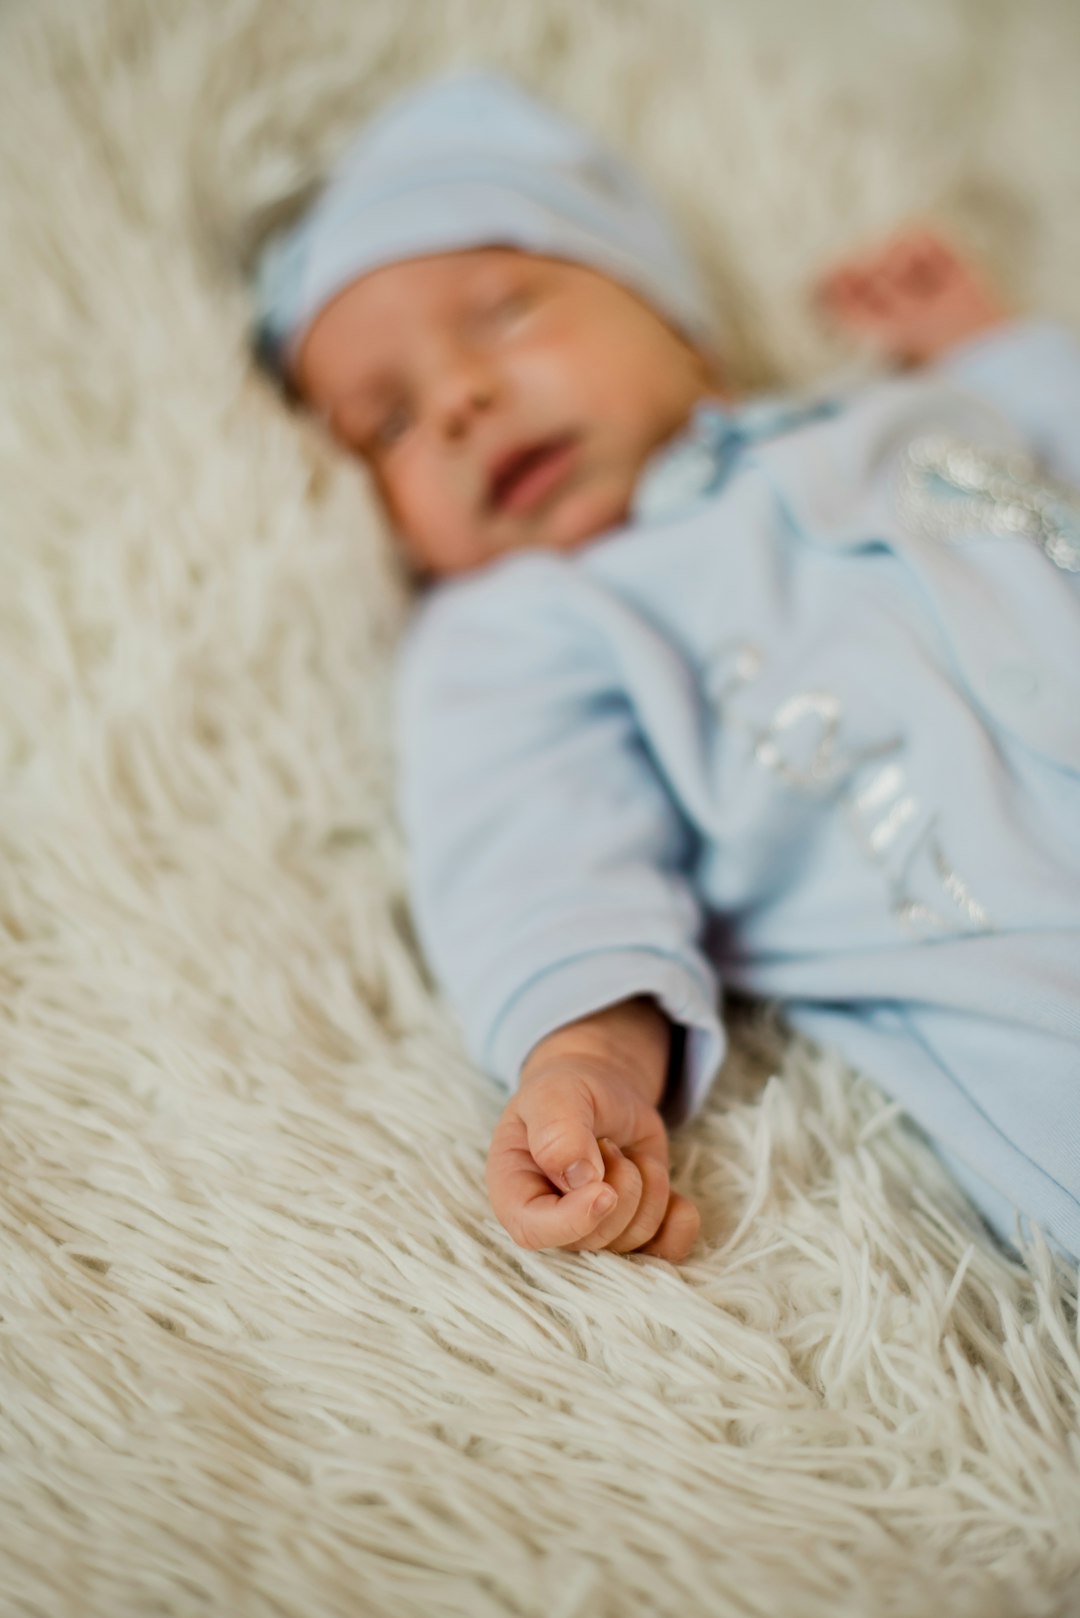 baby in blue onesie lying on white textile